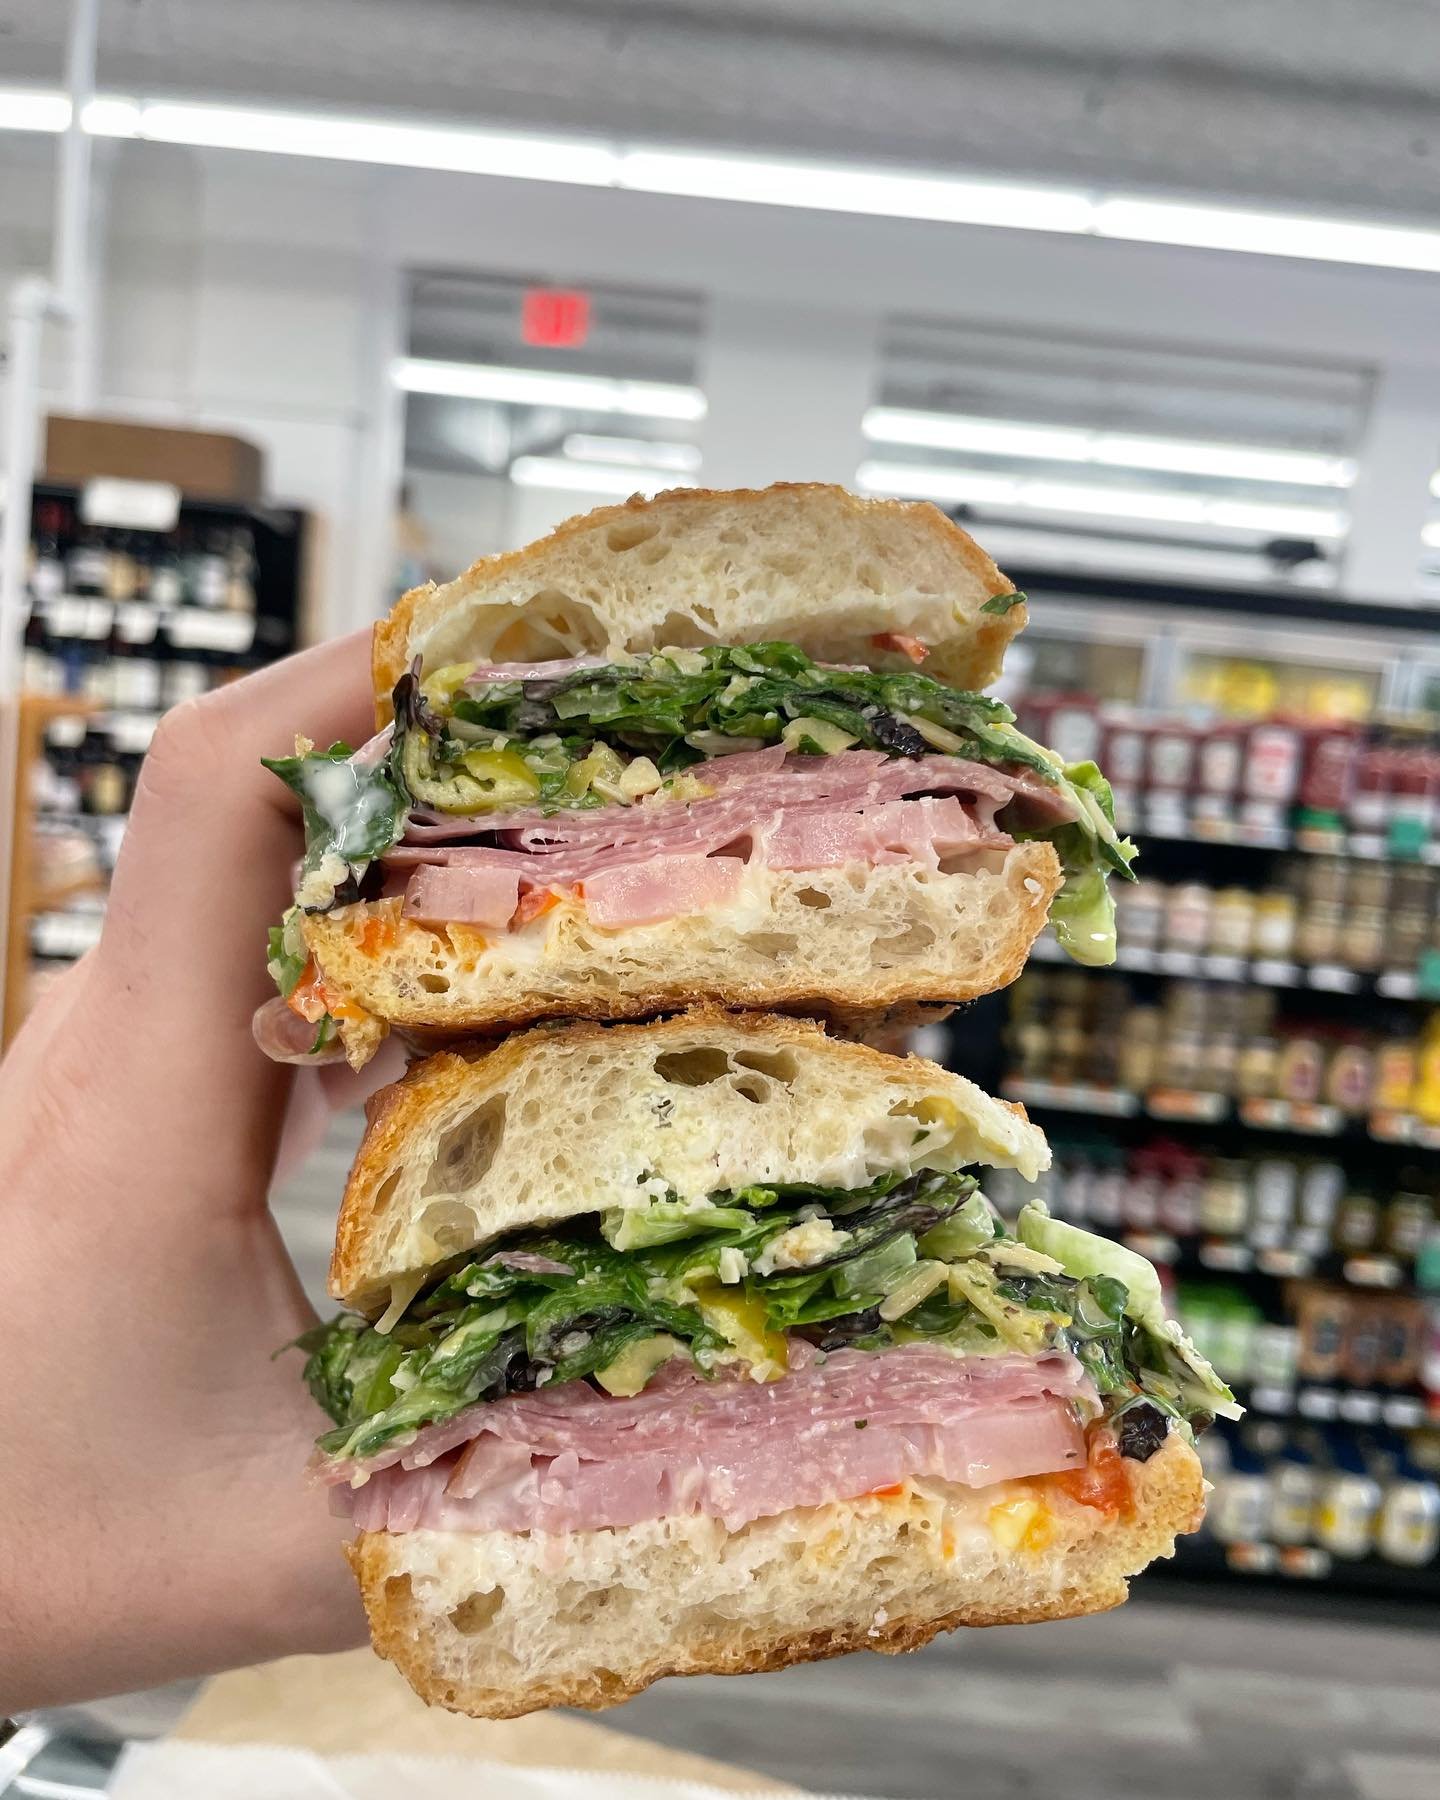 Happy Sunny (for now) Sunday! 

A very special sandwich today, introducing the MYSTIK DAN: ham, salami, shredded lettuce slaw (shreddy, pepperonicini, parm, parsley, garlic, vin) pickled red onion, hots, @dukes_mayonnaise , garlic &amp; herb butter o